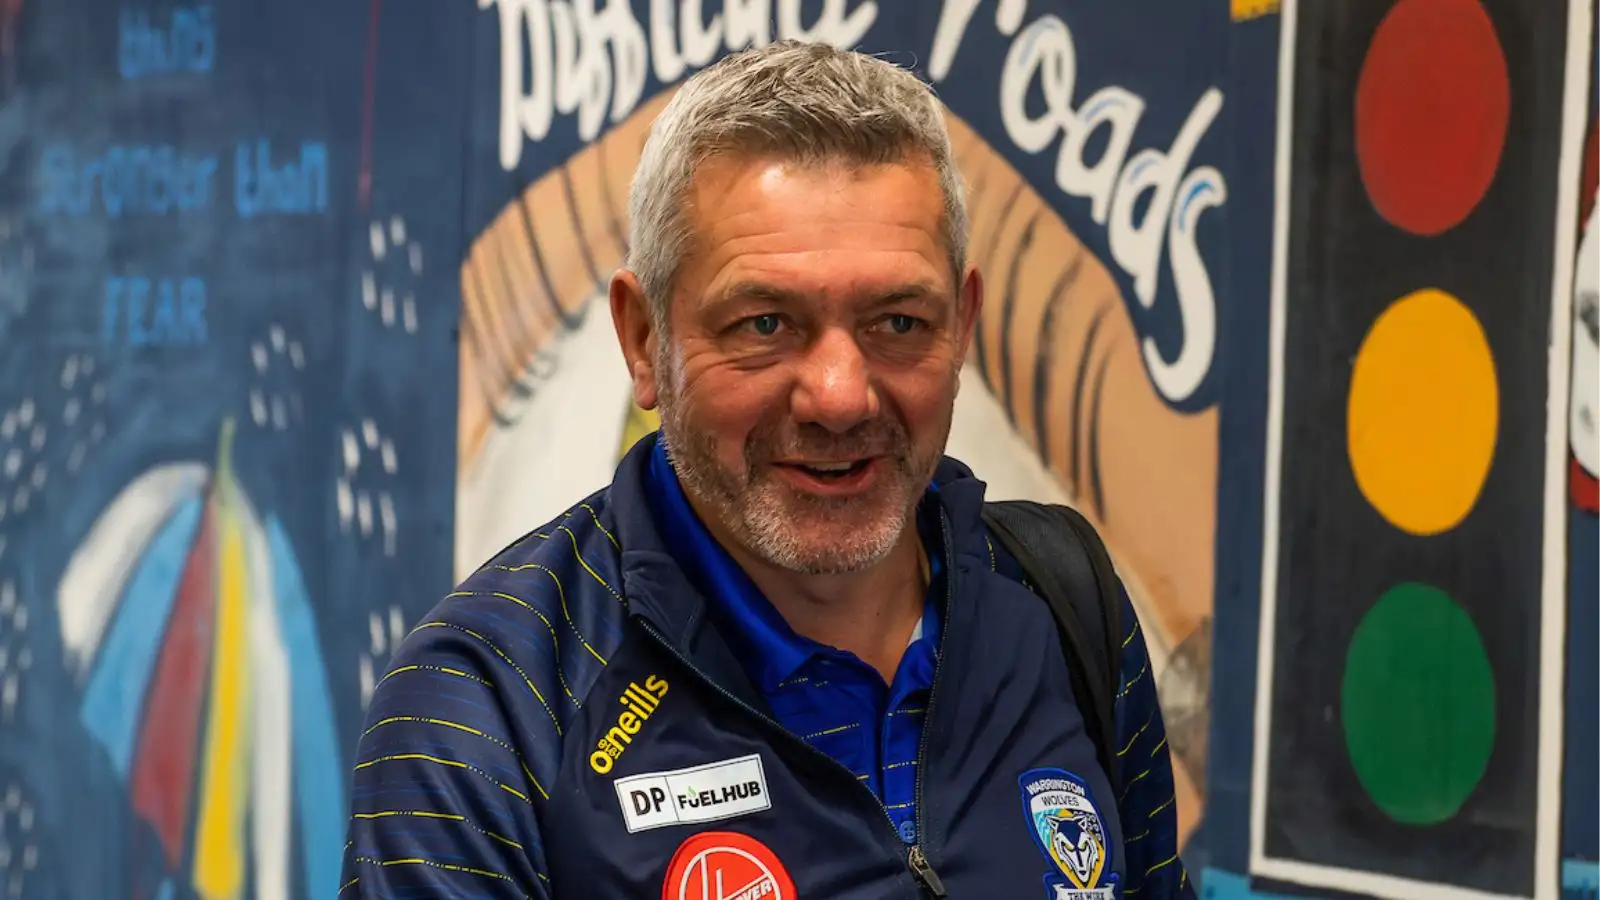 Daryl Powell Warrington Wolves News Images